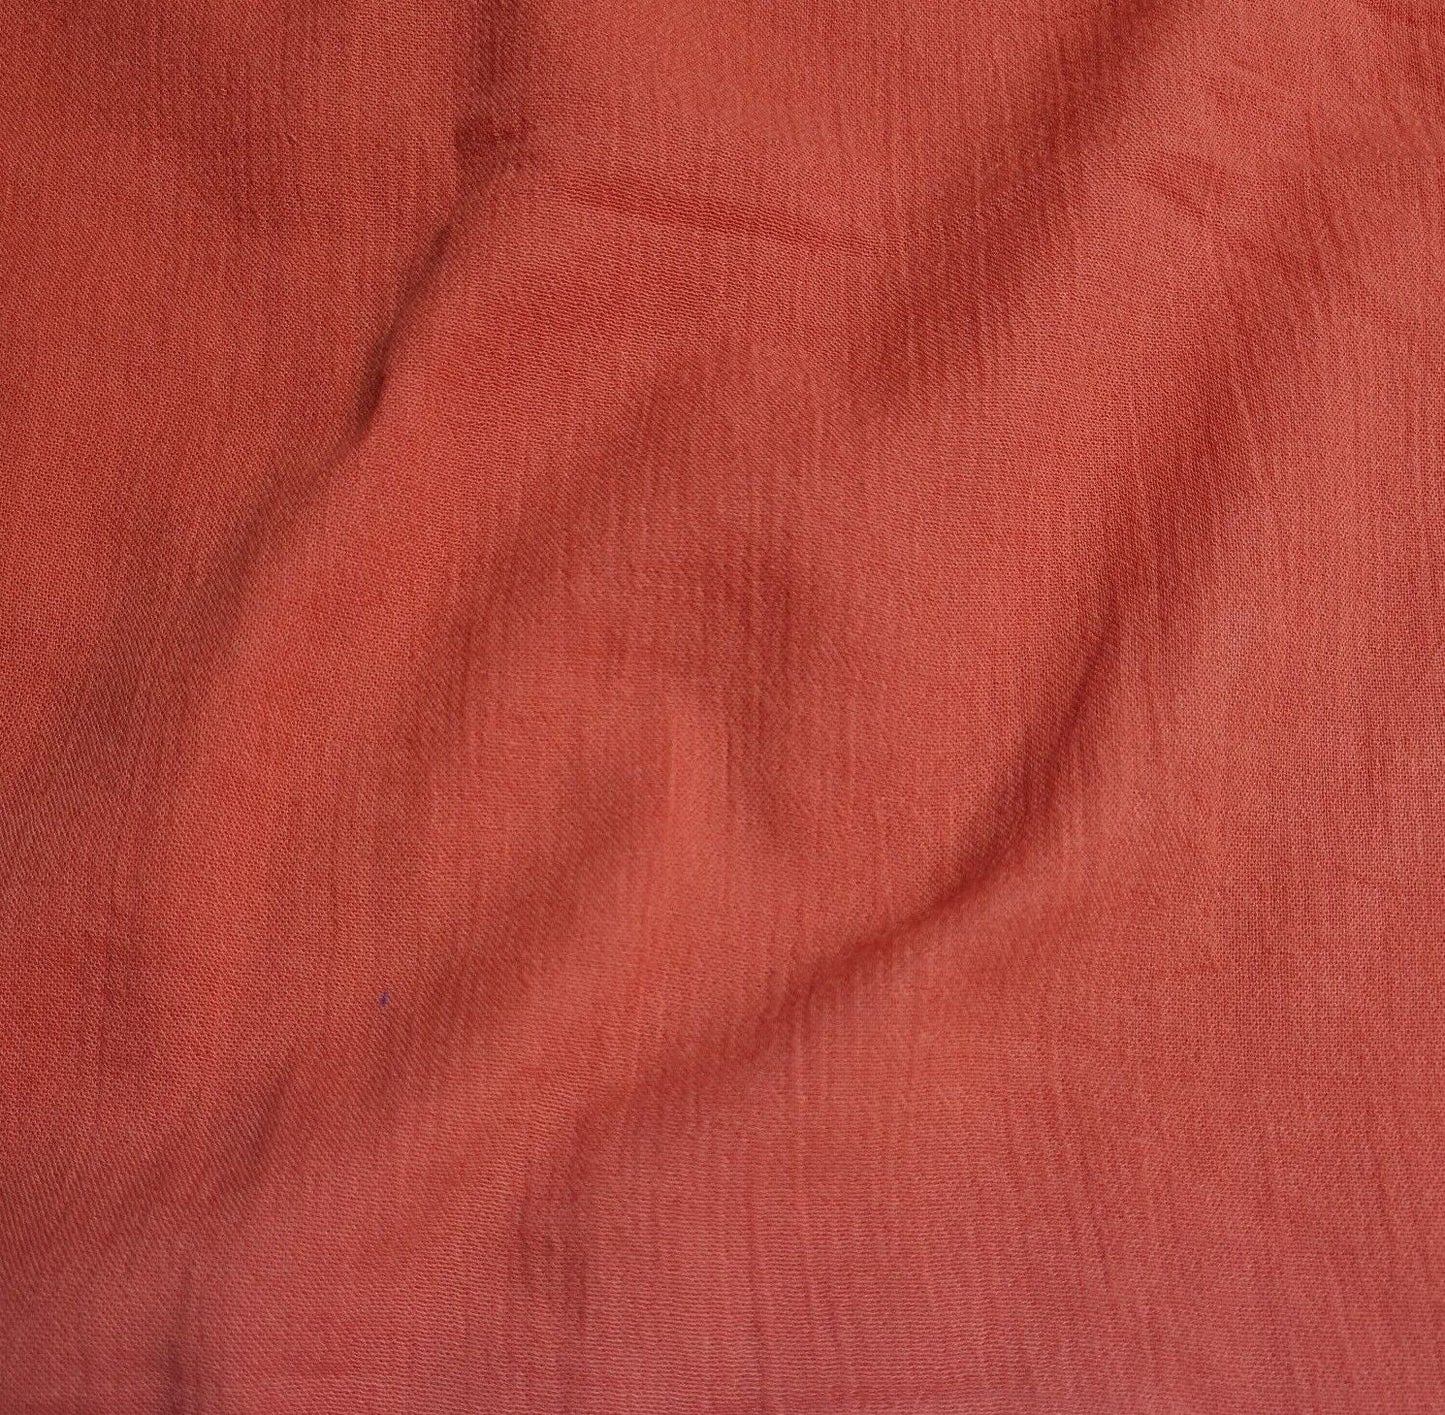 Cotton Cheesecloth Gauze Fabric Coral Red Colour 55" Wide